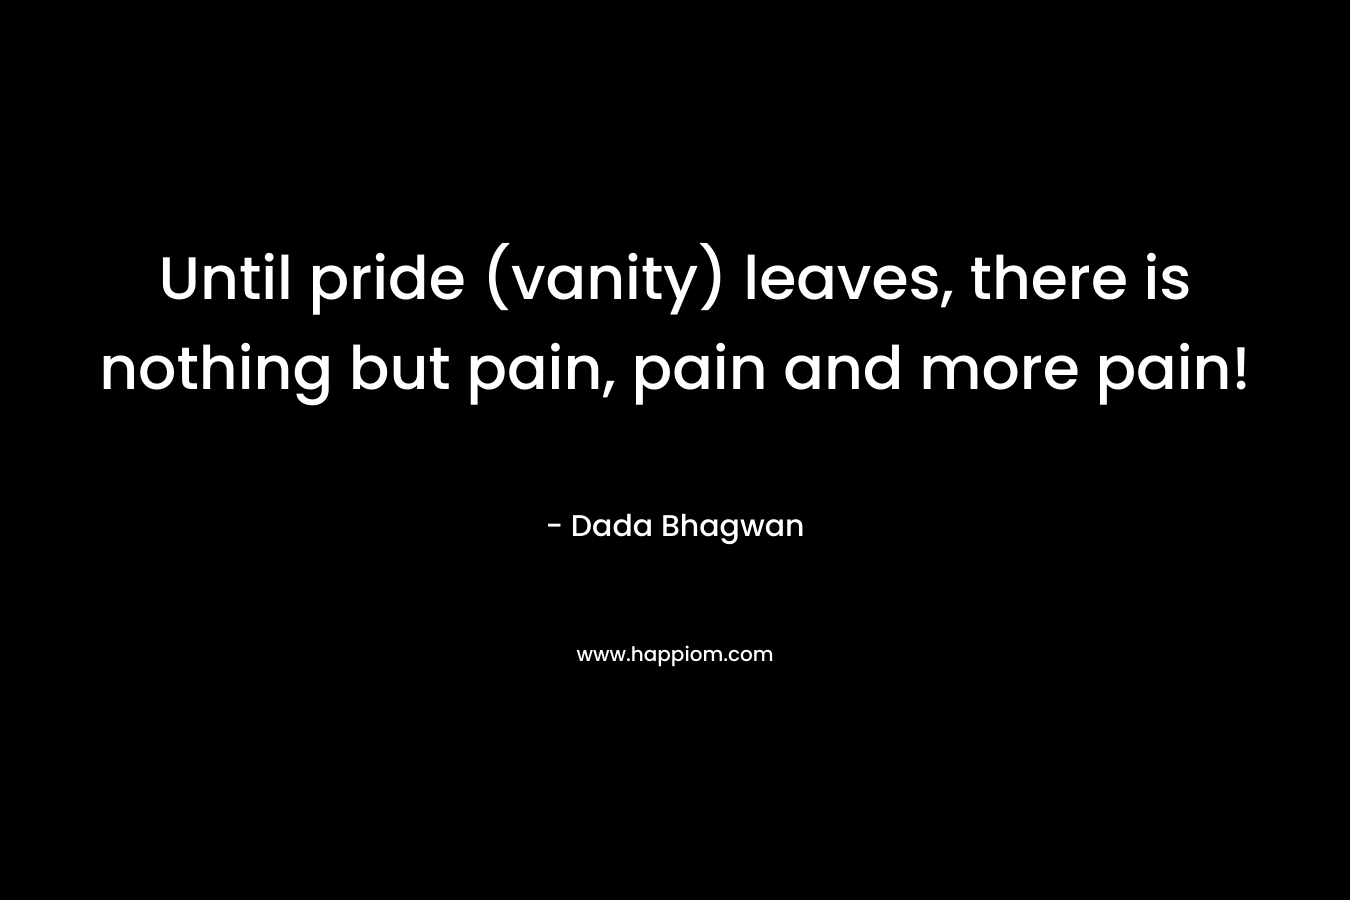 Until pride (vanity) leaves, there is nothing but pain, pain and more pain!